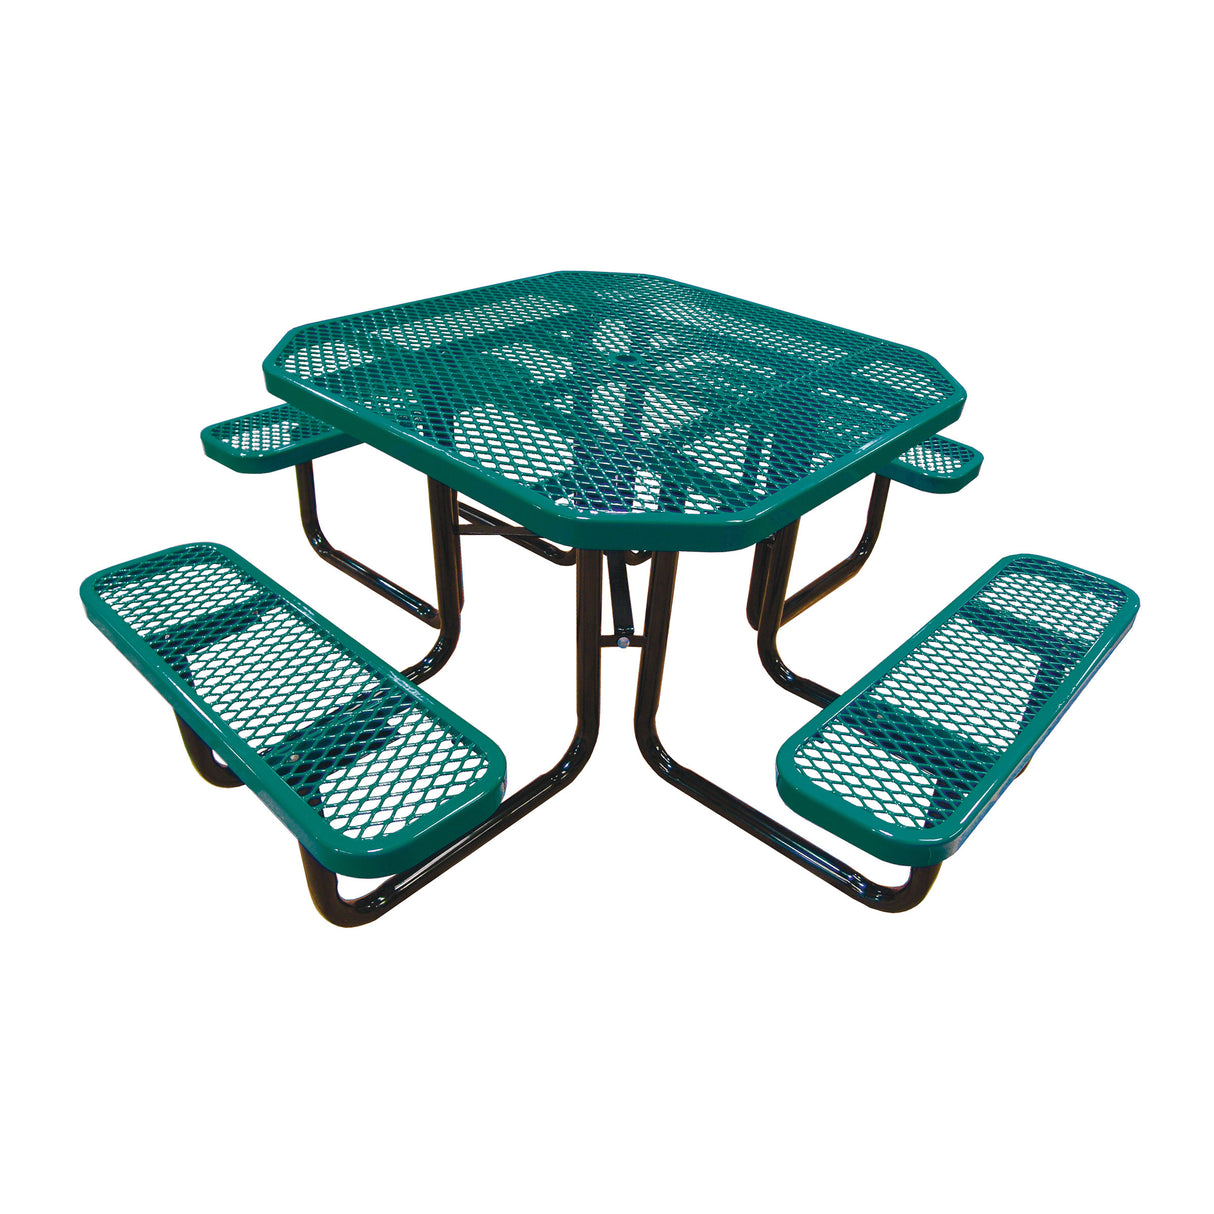 46˝ Octagonal Expanded Metal Table